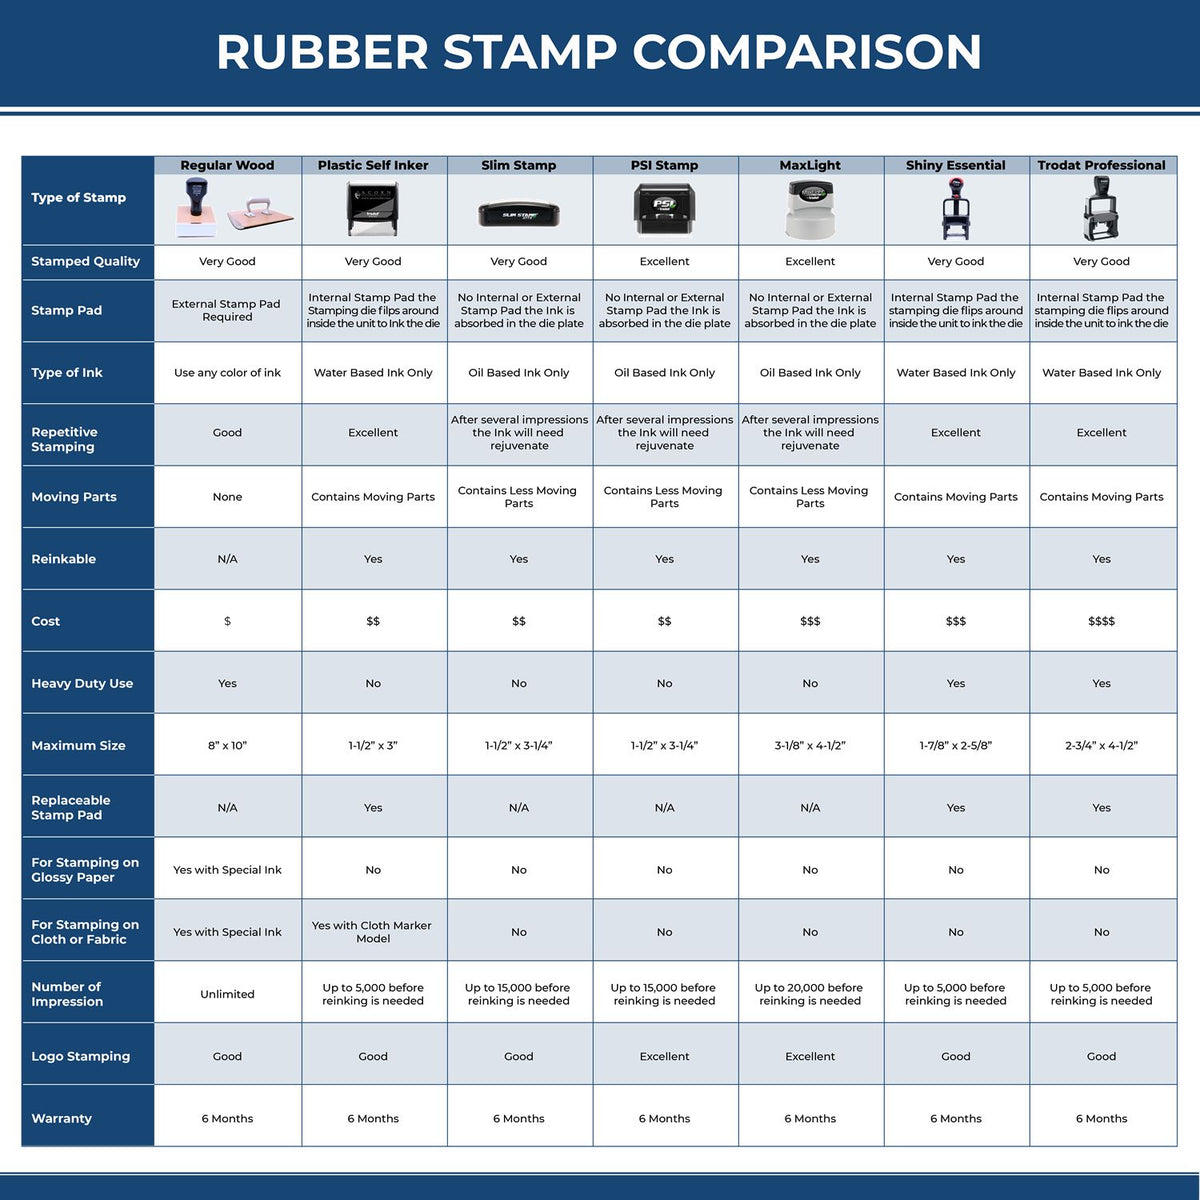 A comparison chart for the different types of mount models available for the PSI Alabama Notary Stamp.